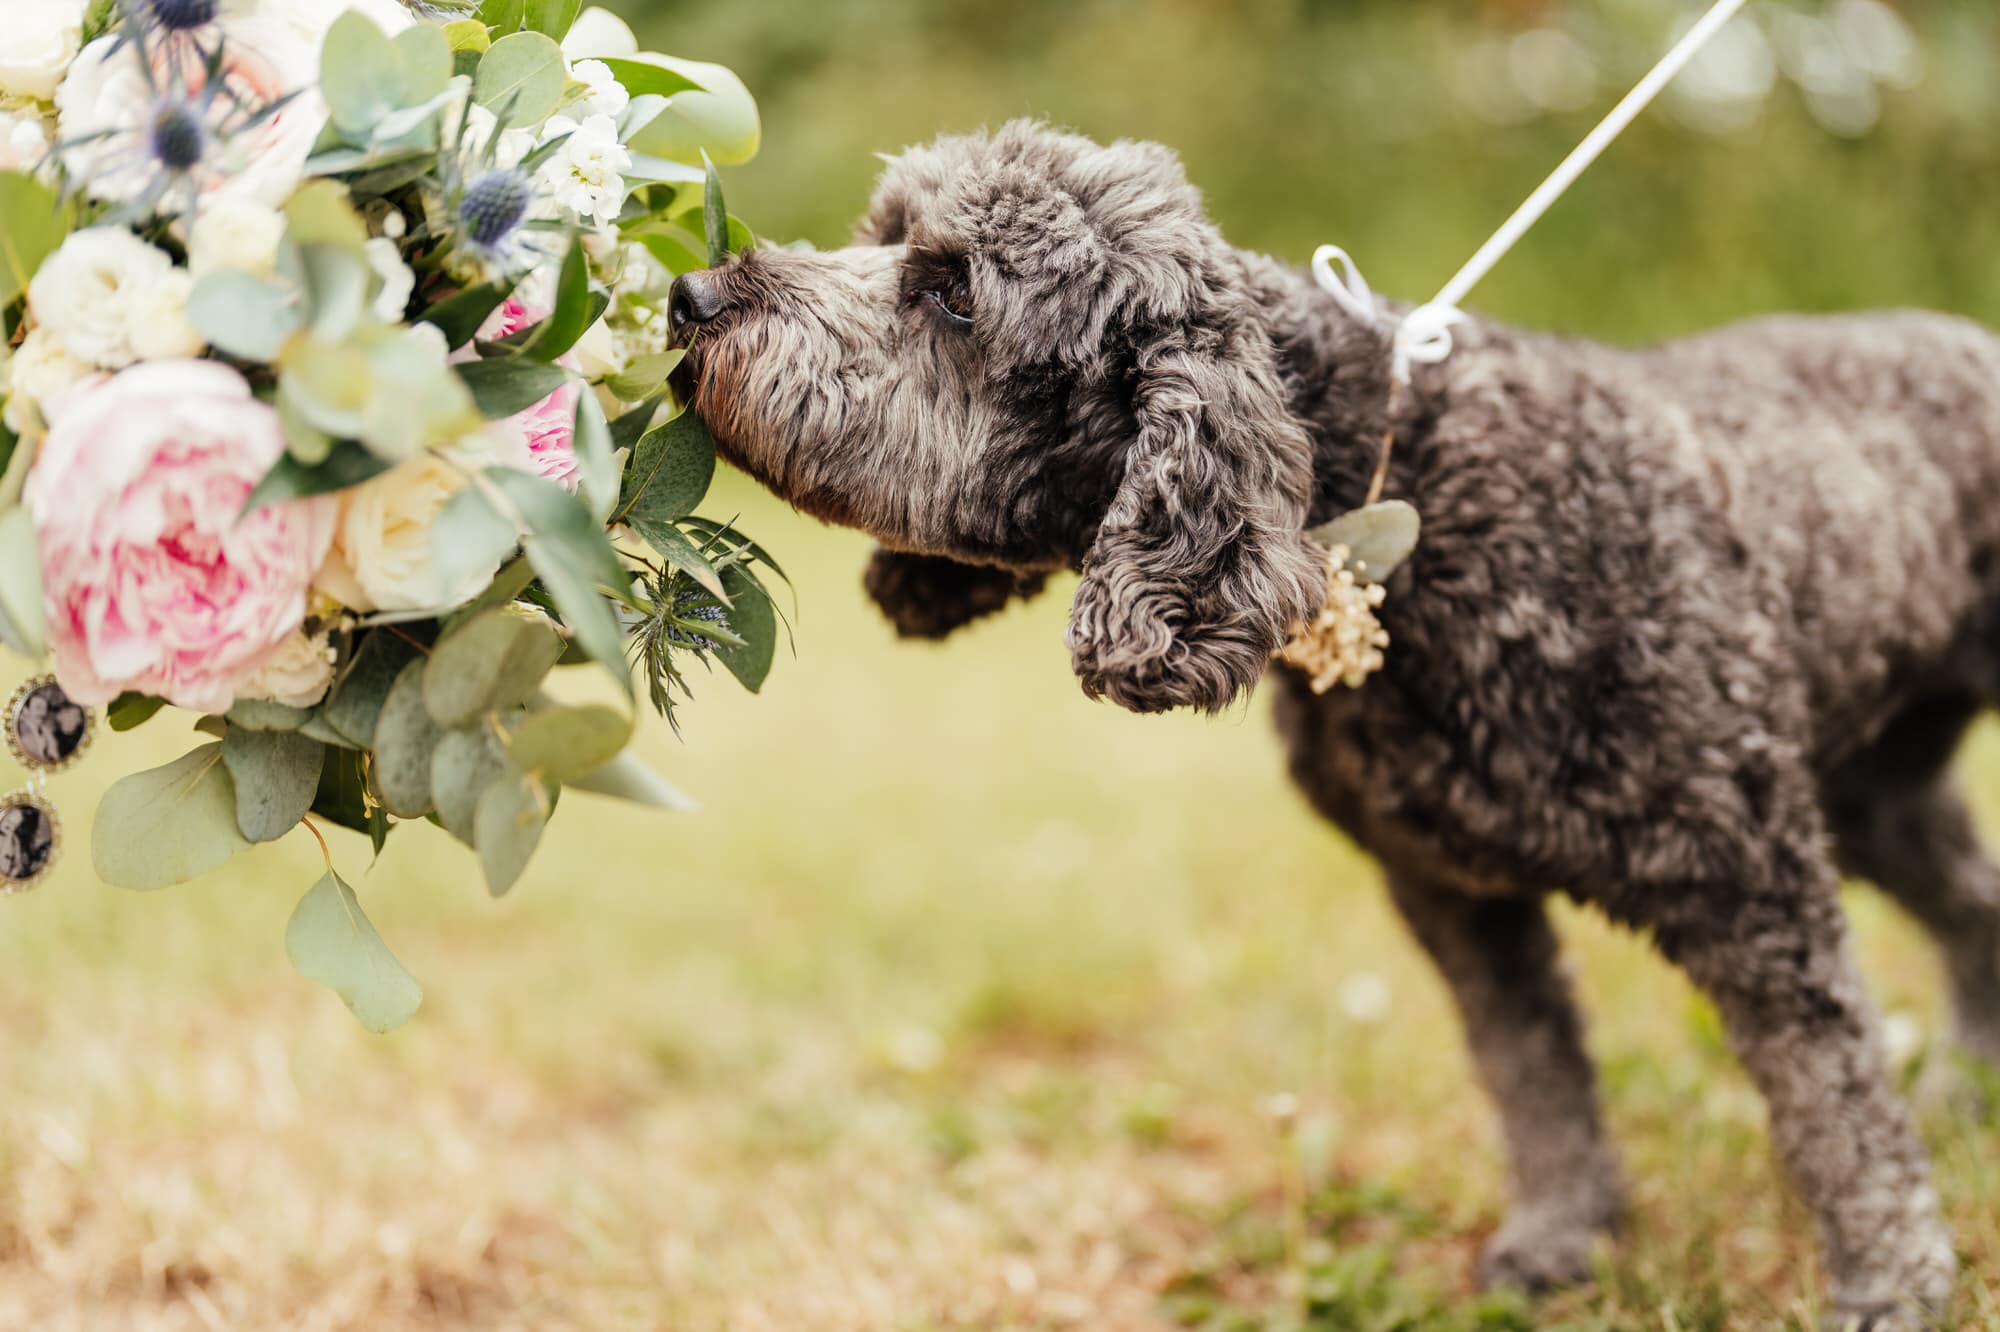 A Canine Companion: The Joy of Having Your Dog at Your Wedding